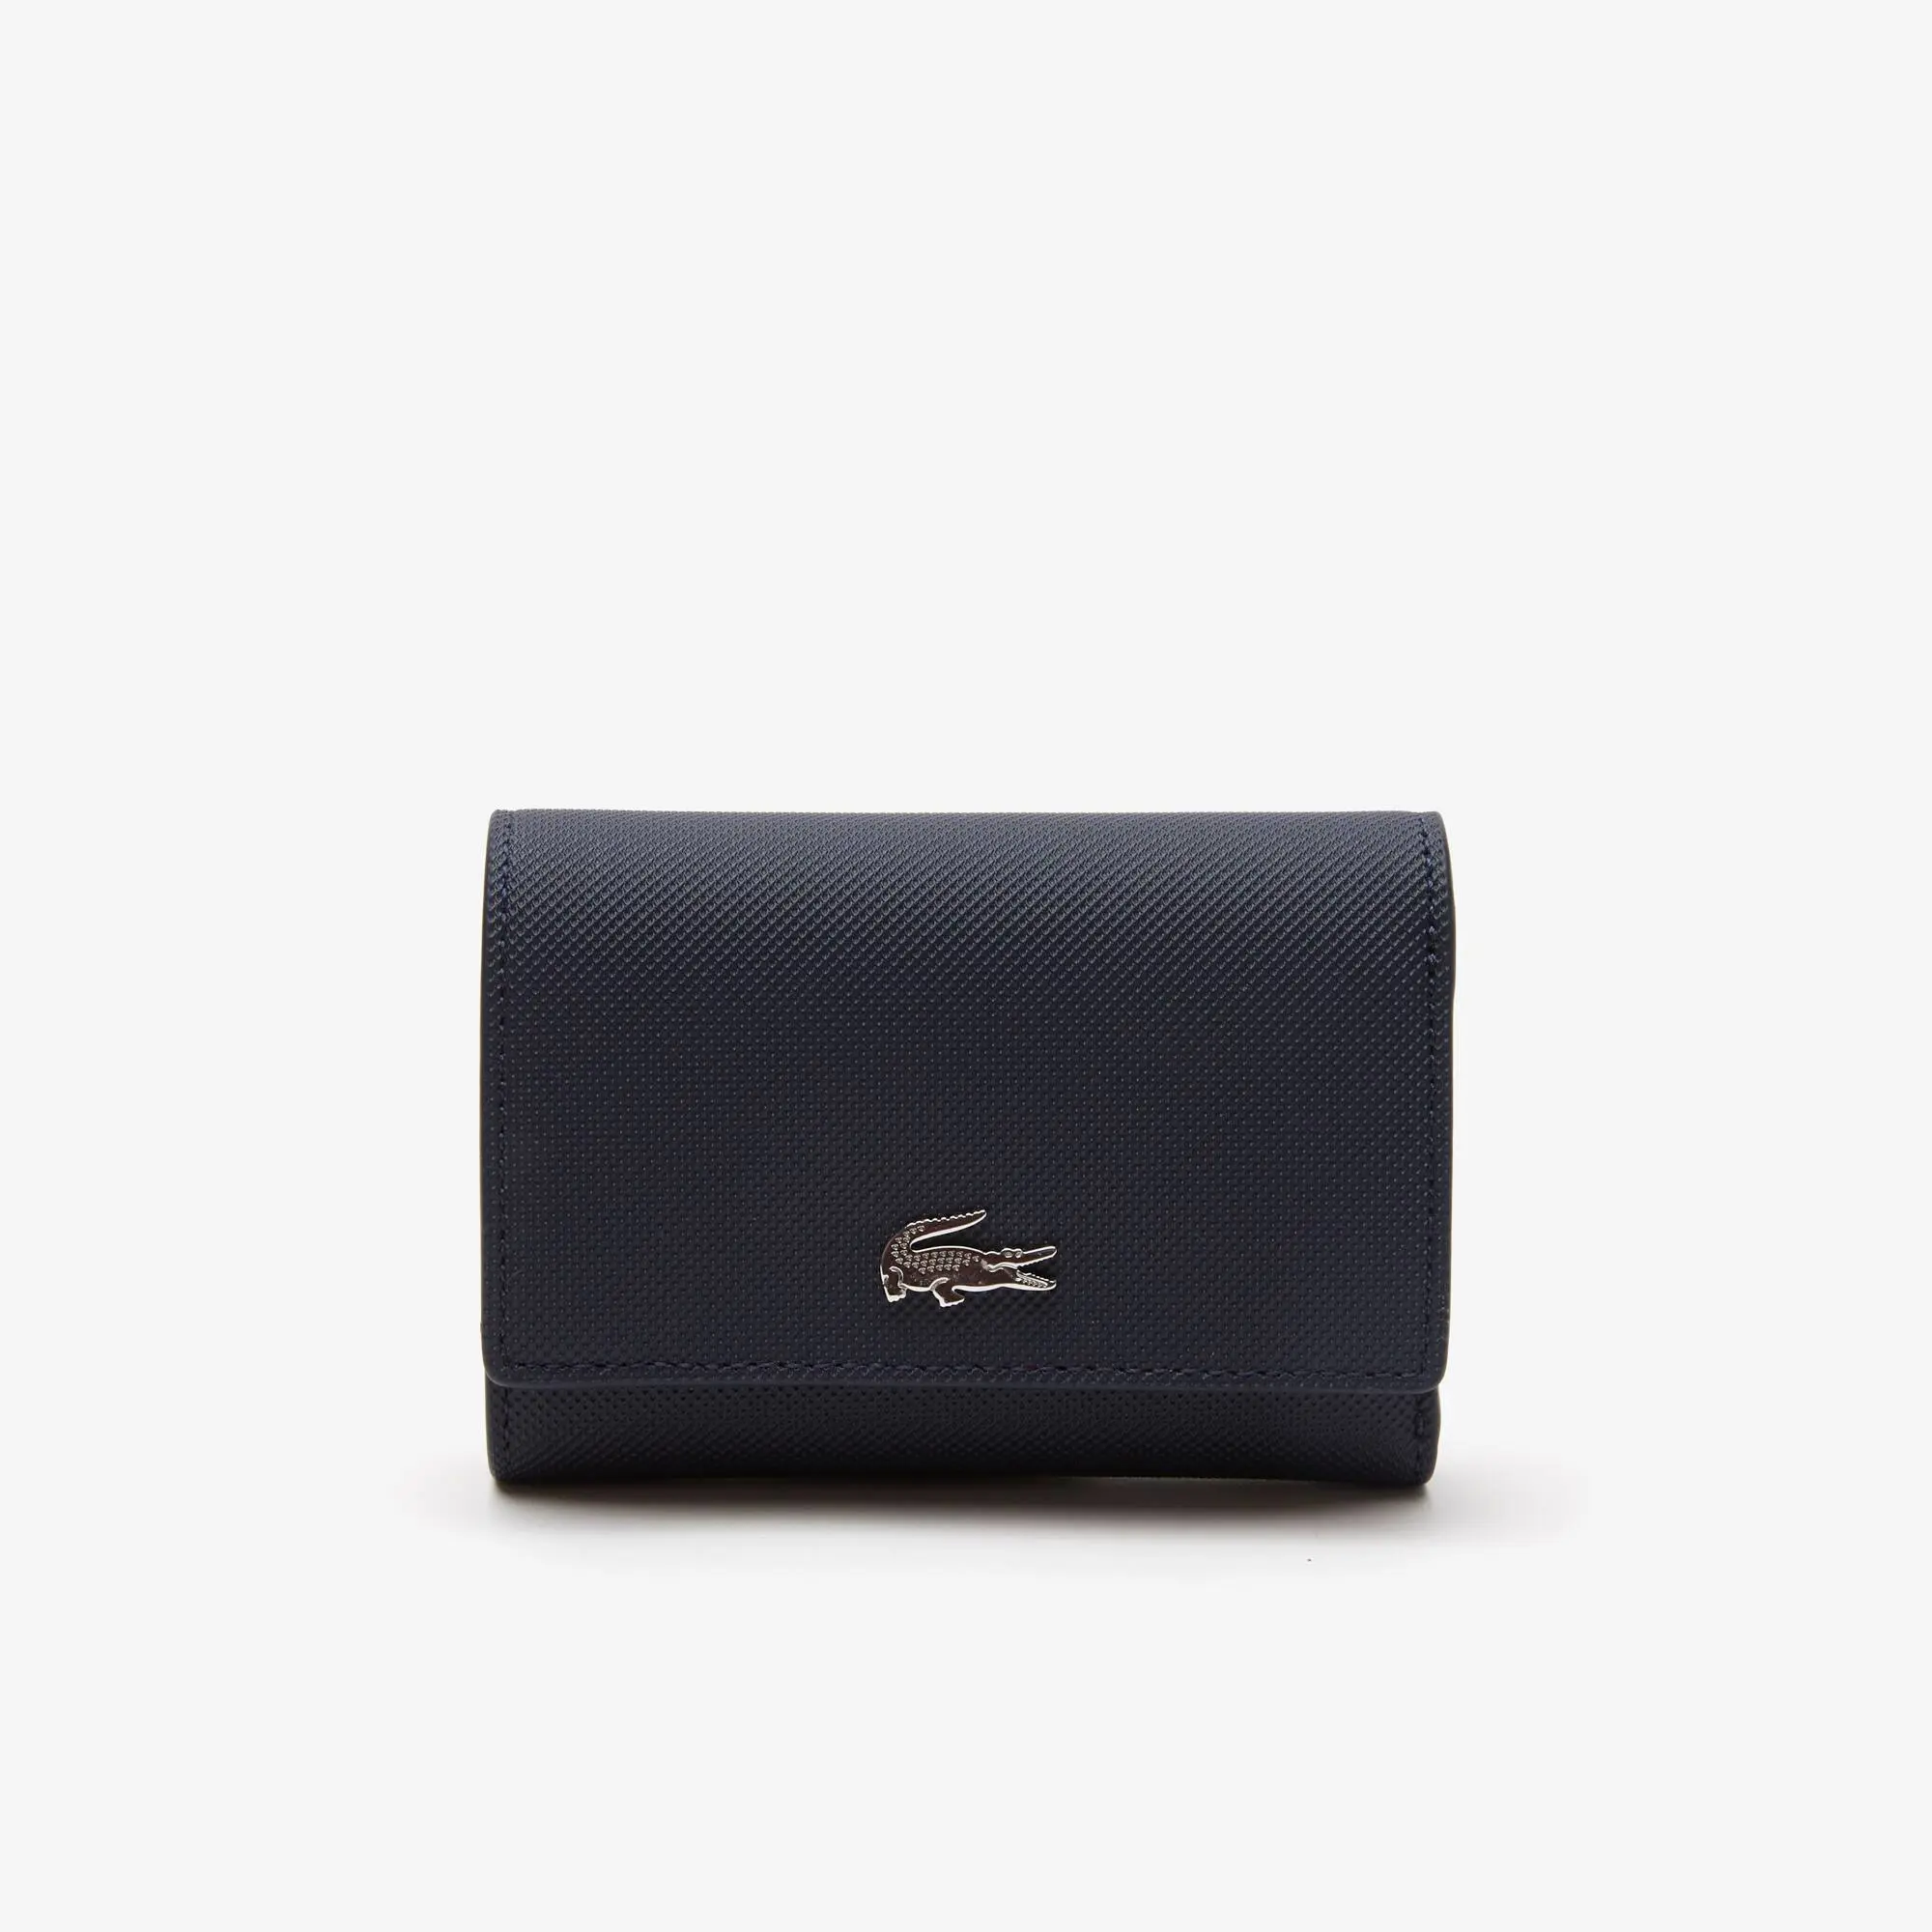 Lacoste Women’s Anna Snap Front Wallet. 1